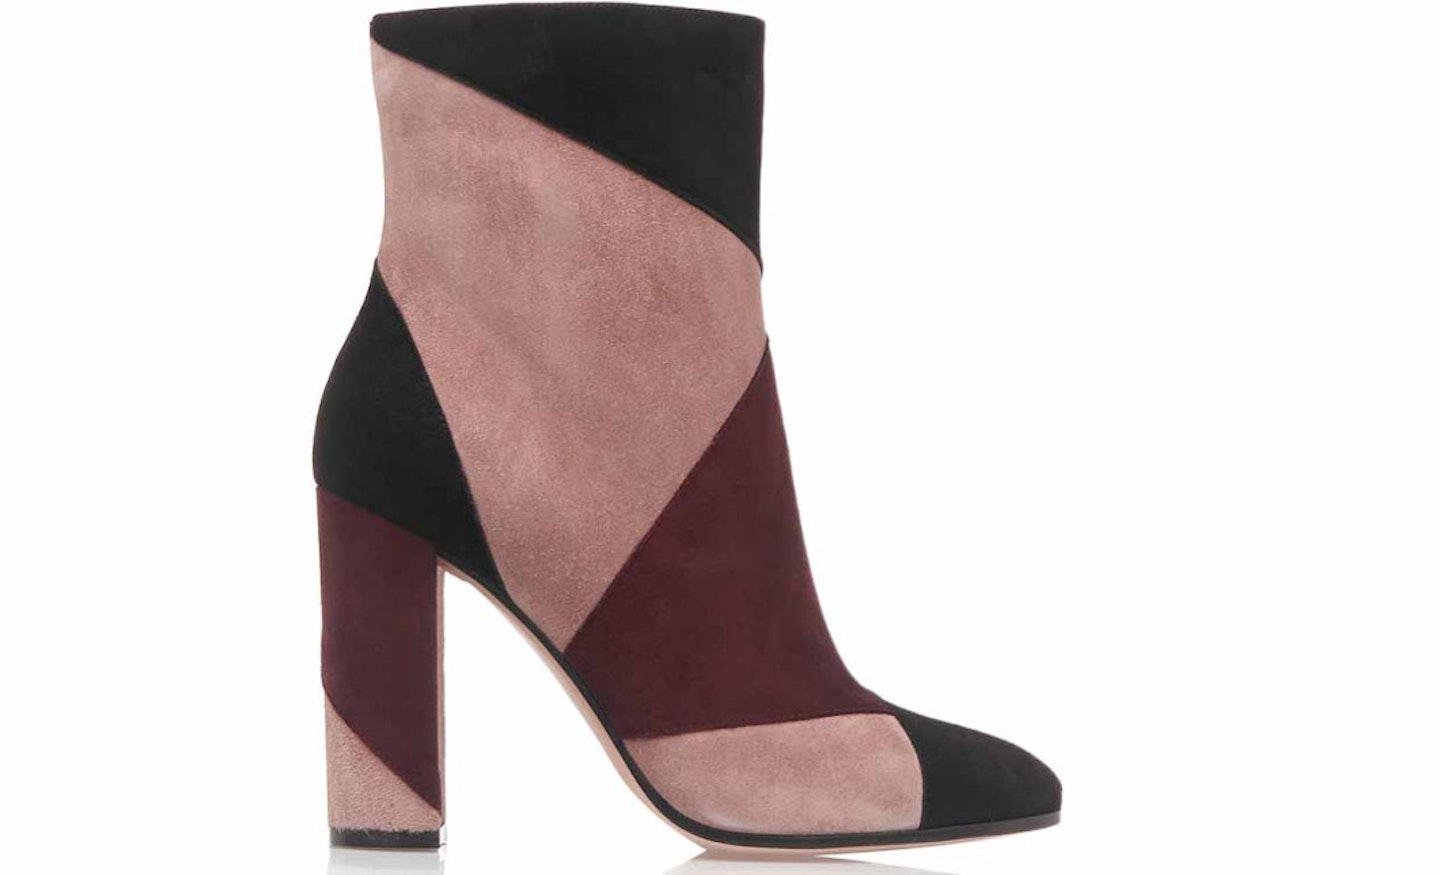 Gianvito Rossi Patchwork Boots, £745.00